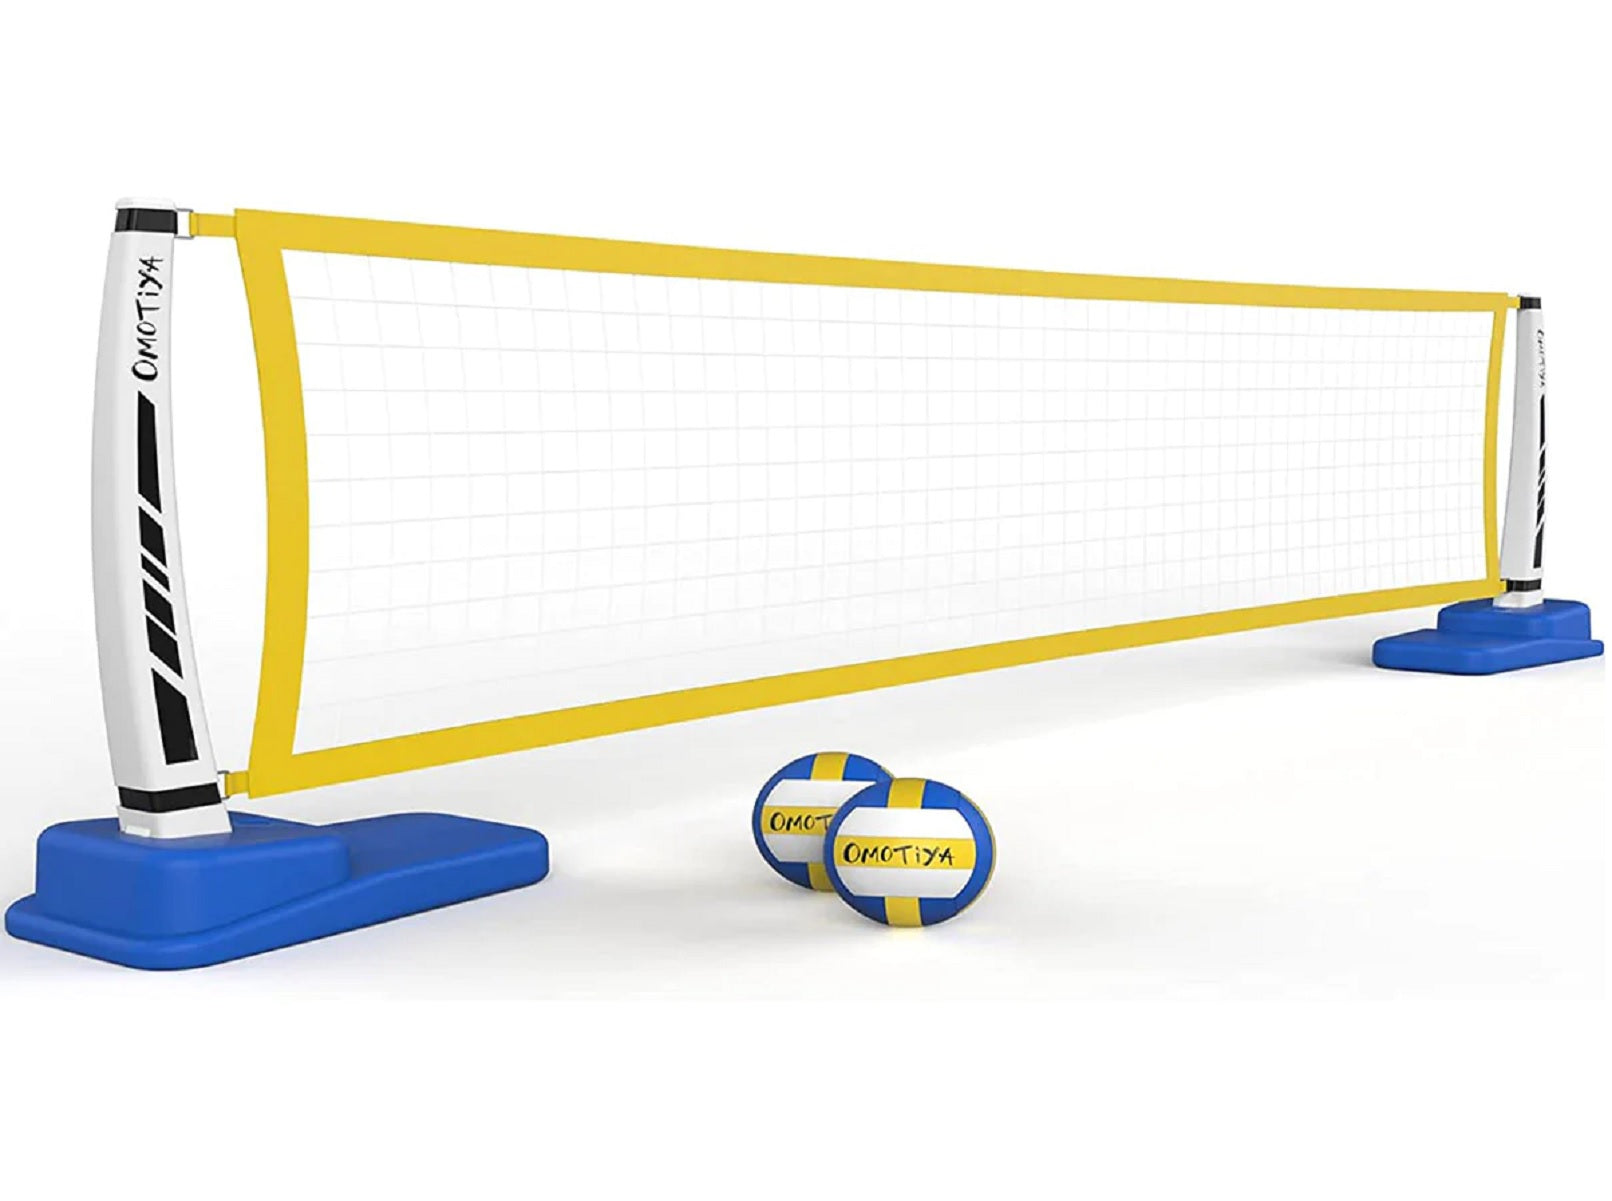 OMOTIYA Pool Volleyball Net Set with Base, Net, Volleyballs and Pump 39" X 256" X 6.5"